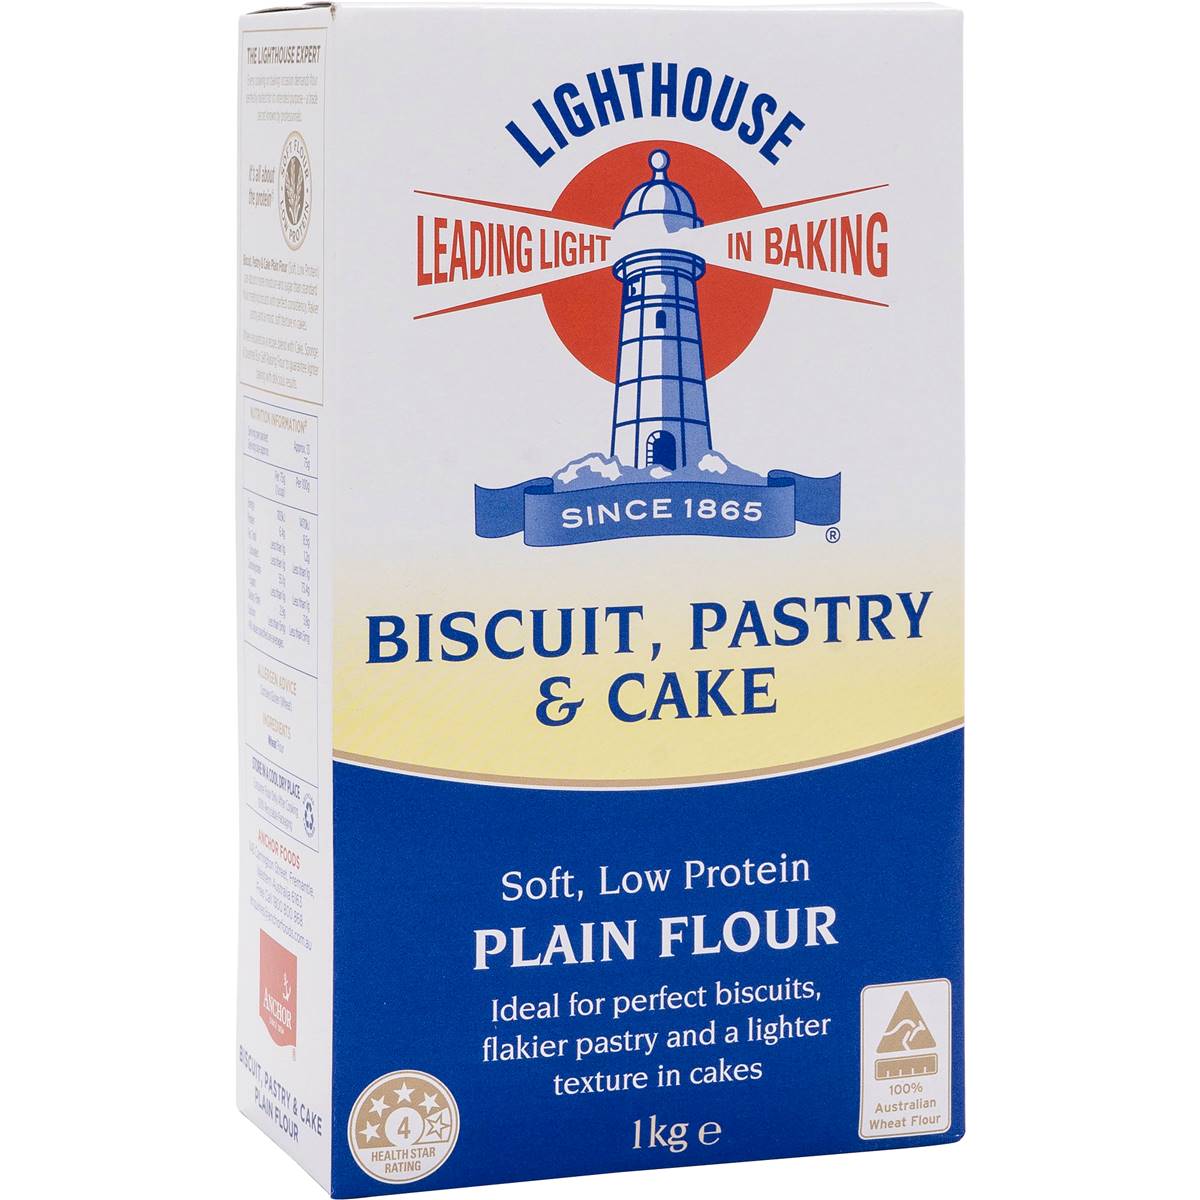 Lighthouse Biscuit Pastry & Cake Plain Flour